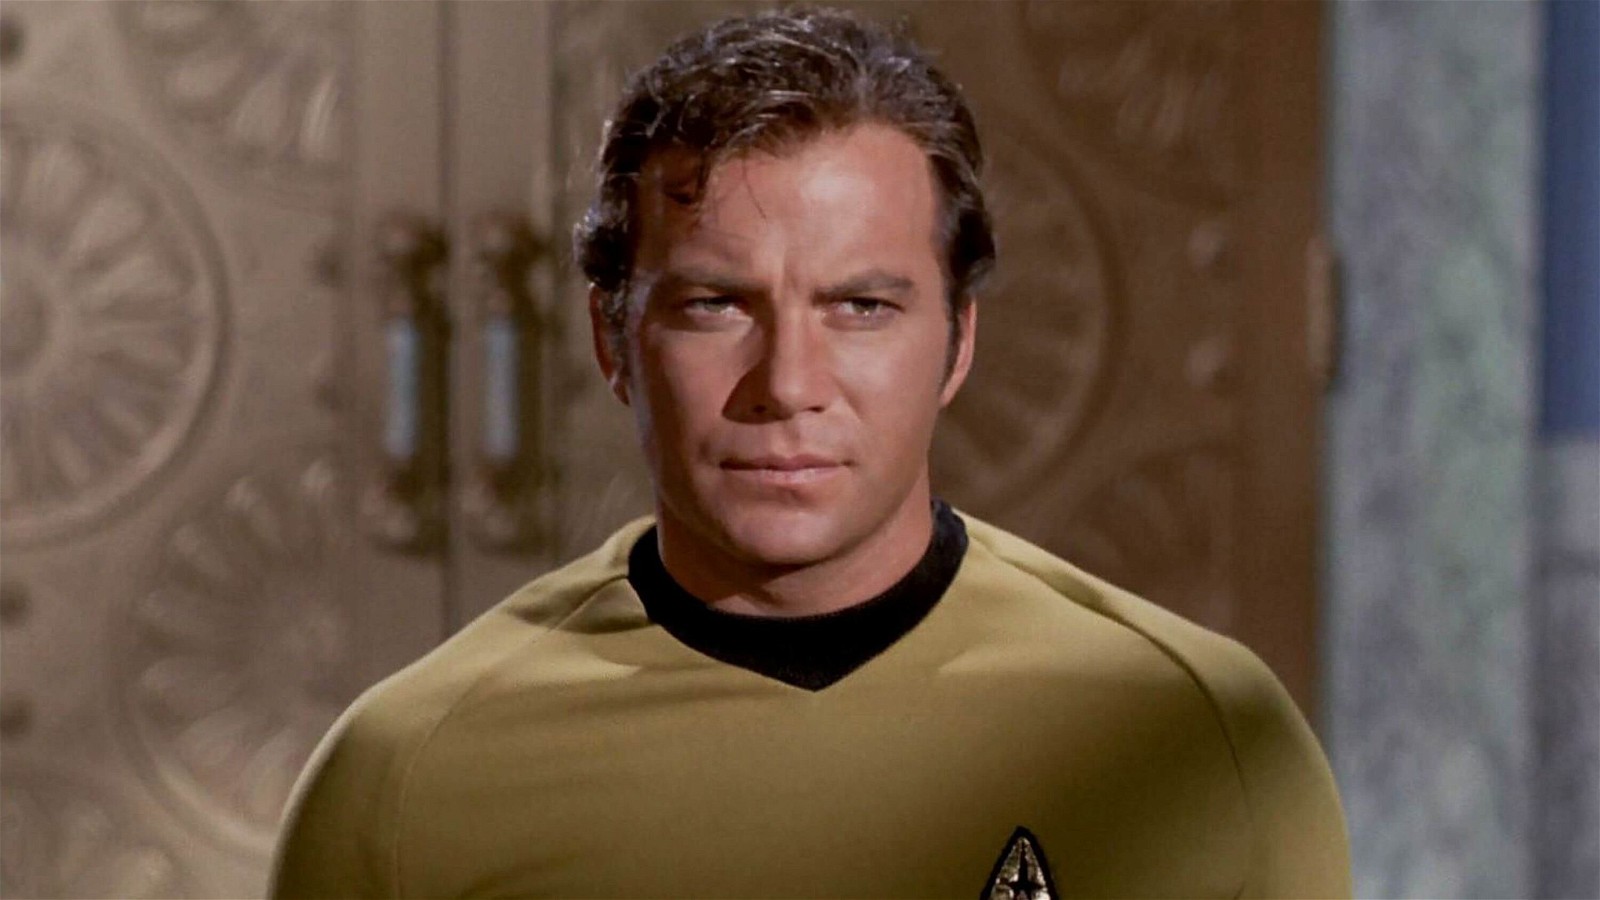 William Shatner gave an iconic performance as Captain Kirk